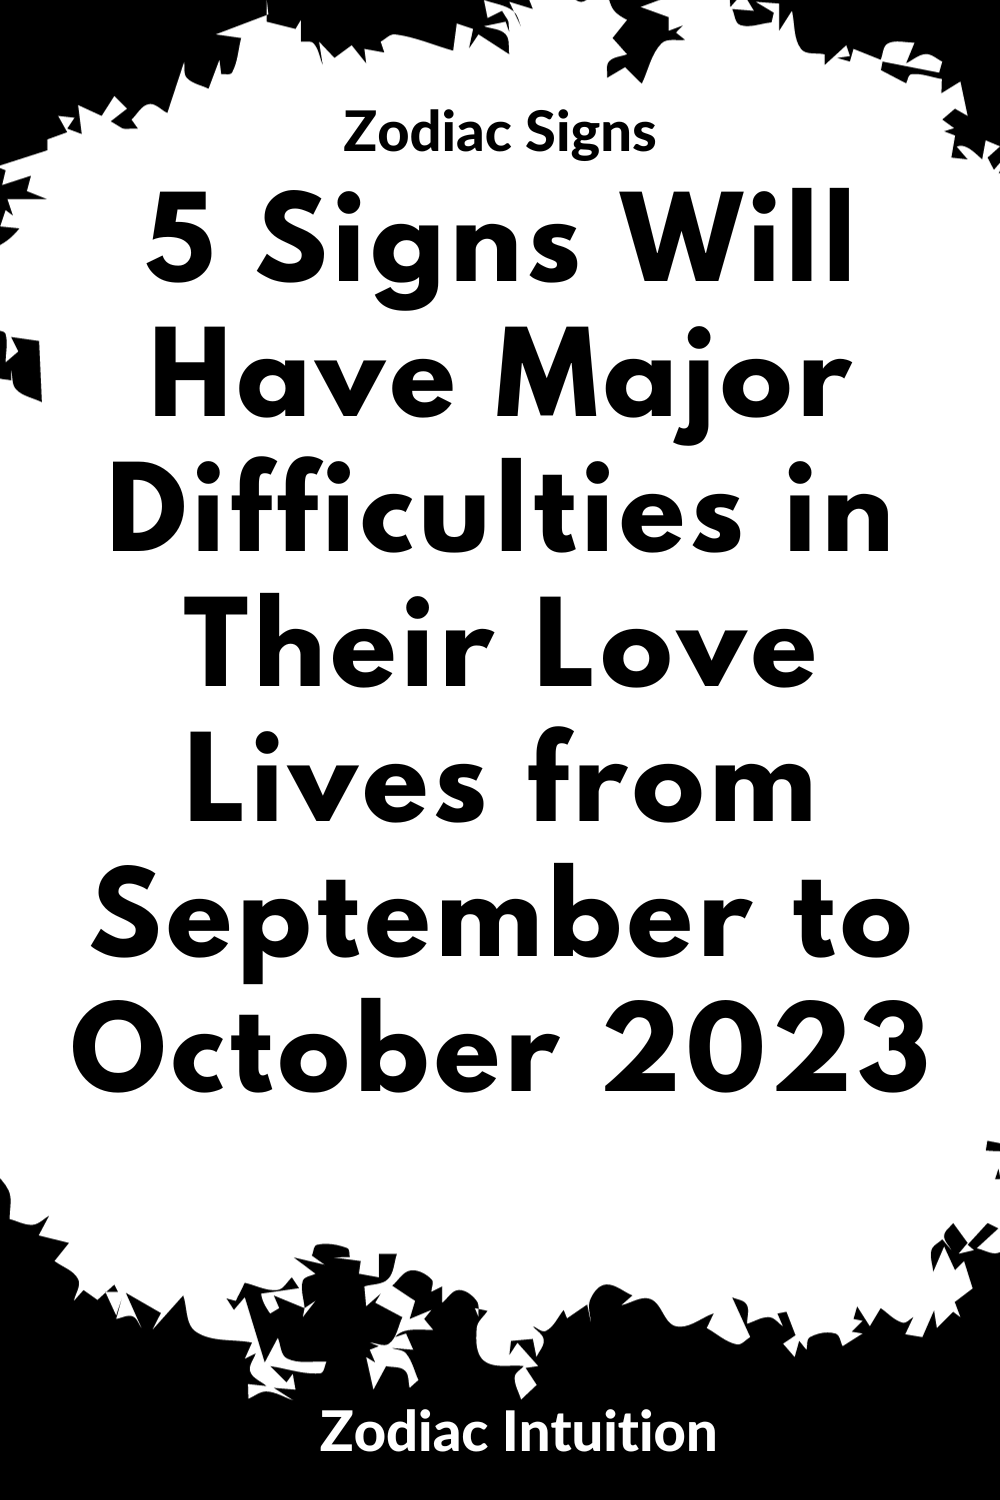 5 Signs Will Have Major Difficulties in Their Love Lives from September to October 2023